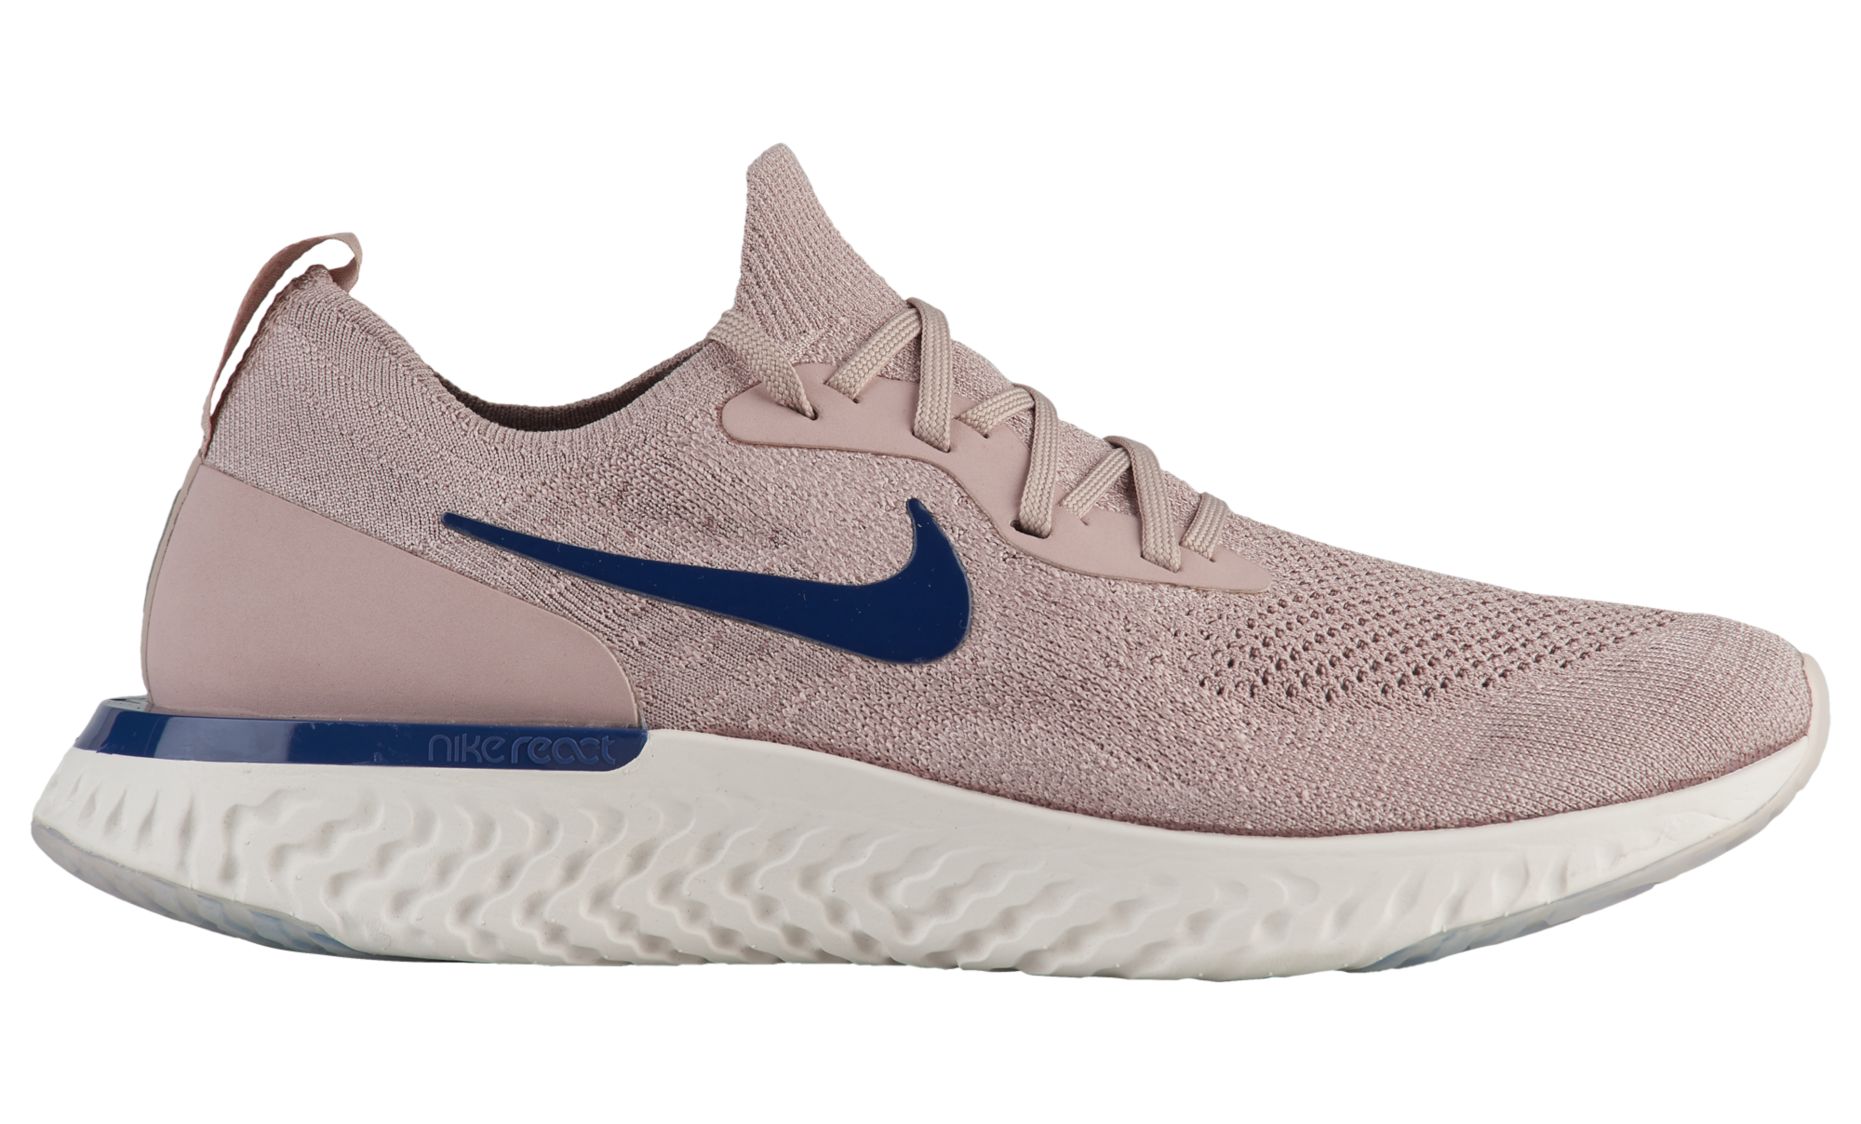 NIKE EPIC REACT FLYKNIT DIFFUSED TAUPE : BLUE VOID - PHANTOM 2